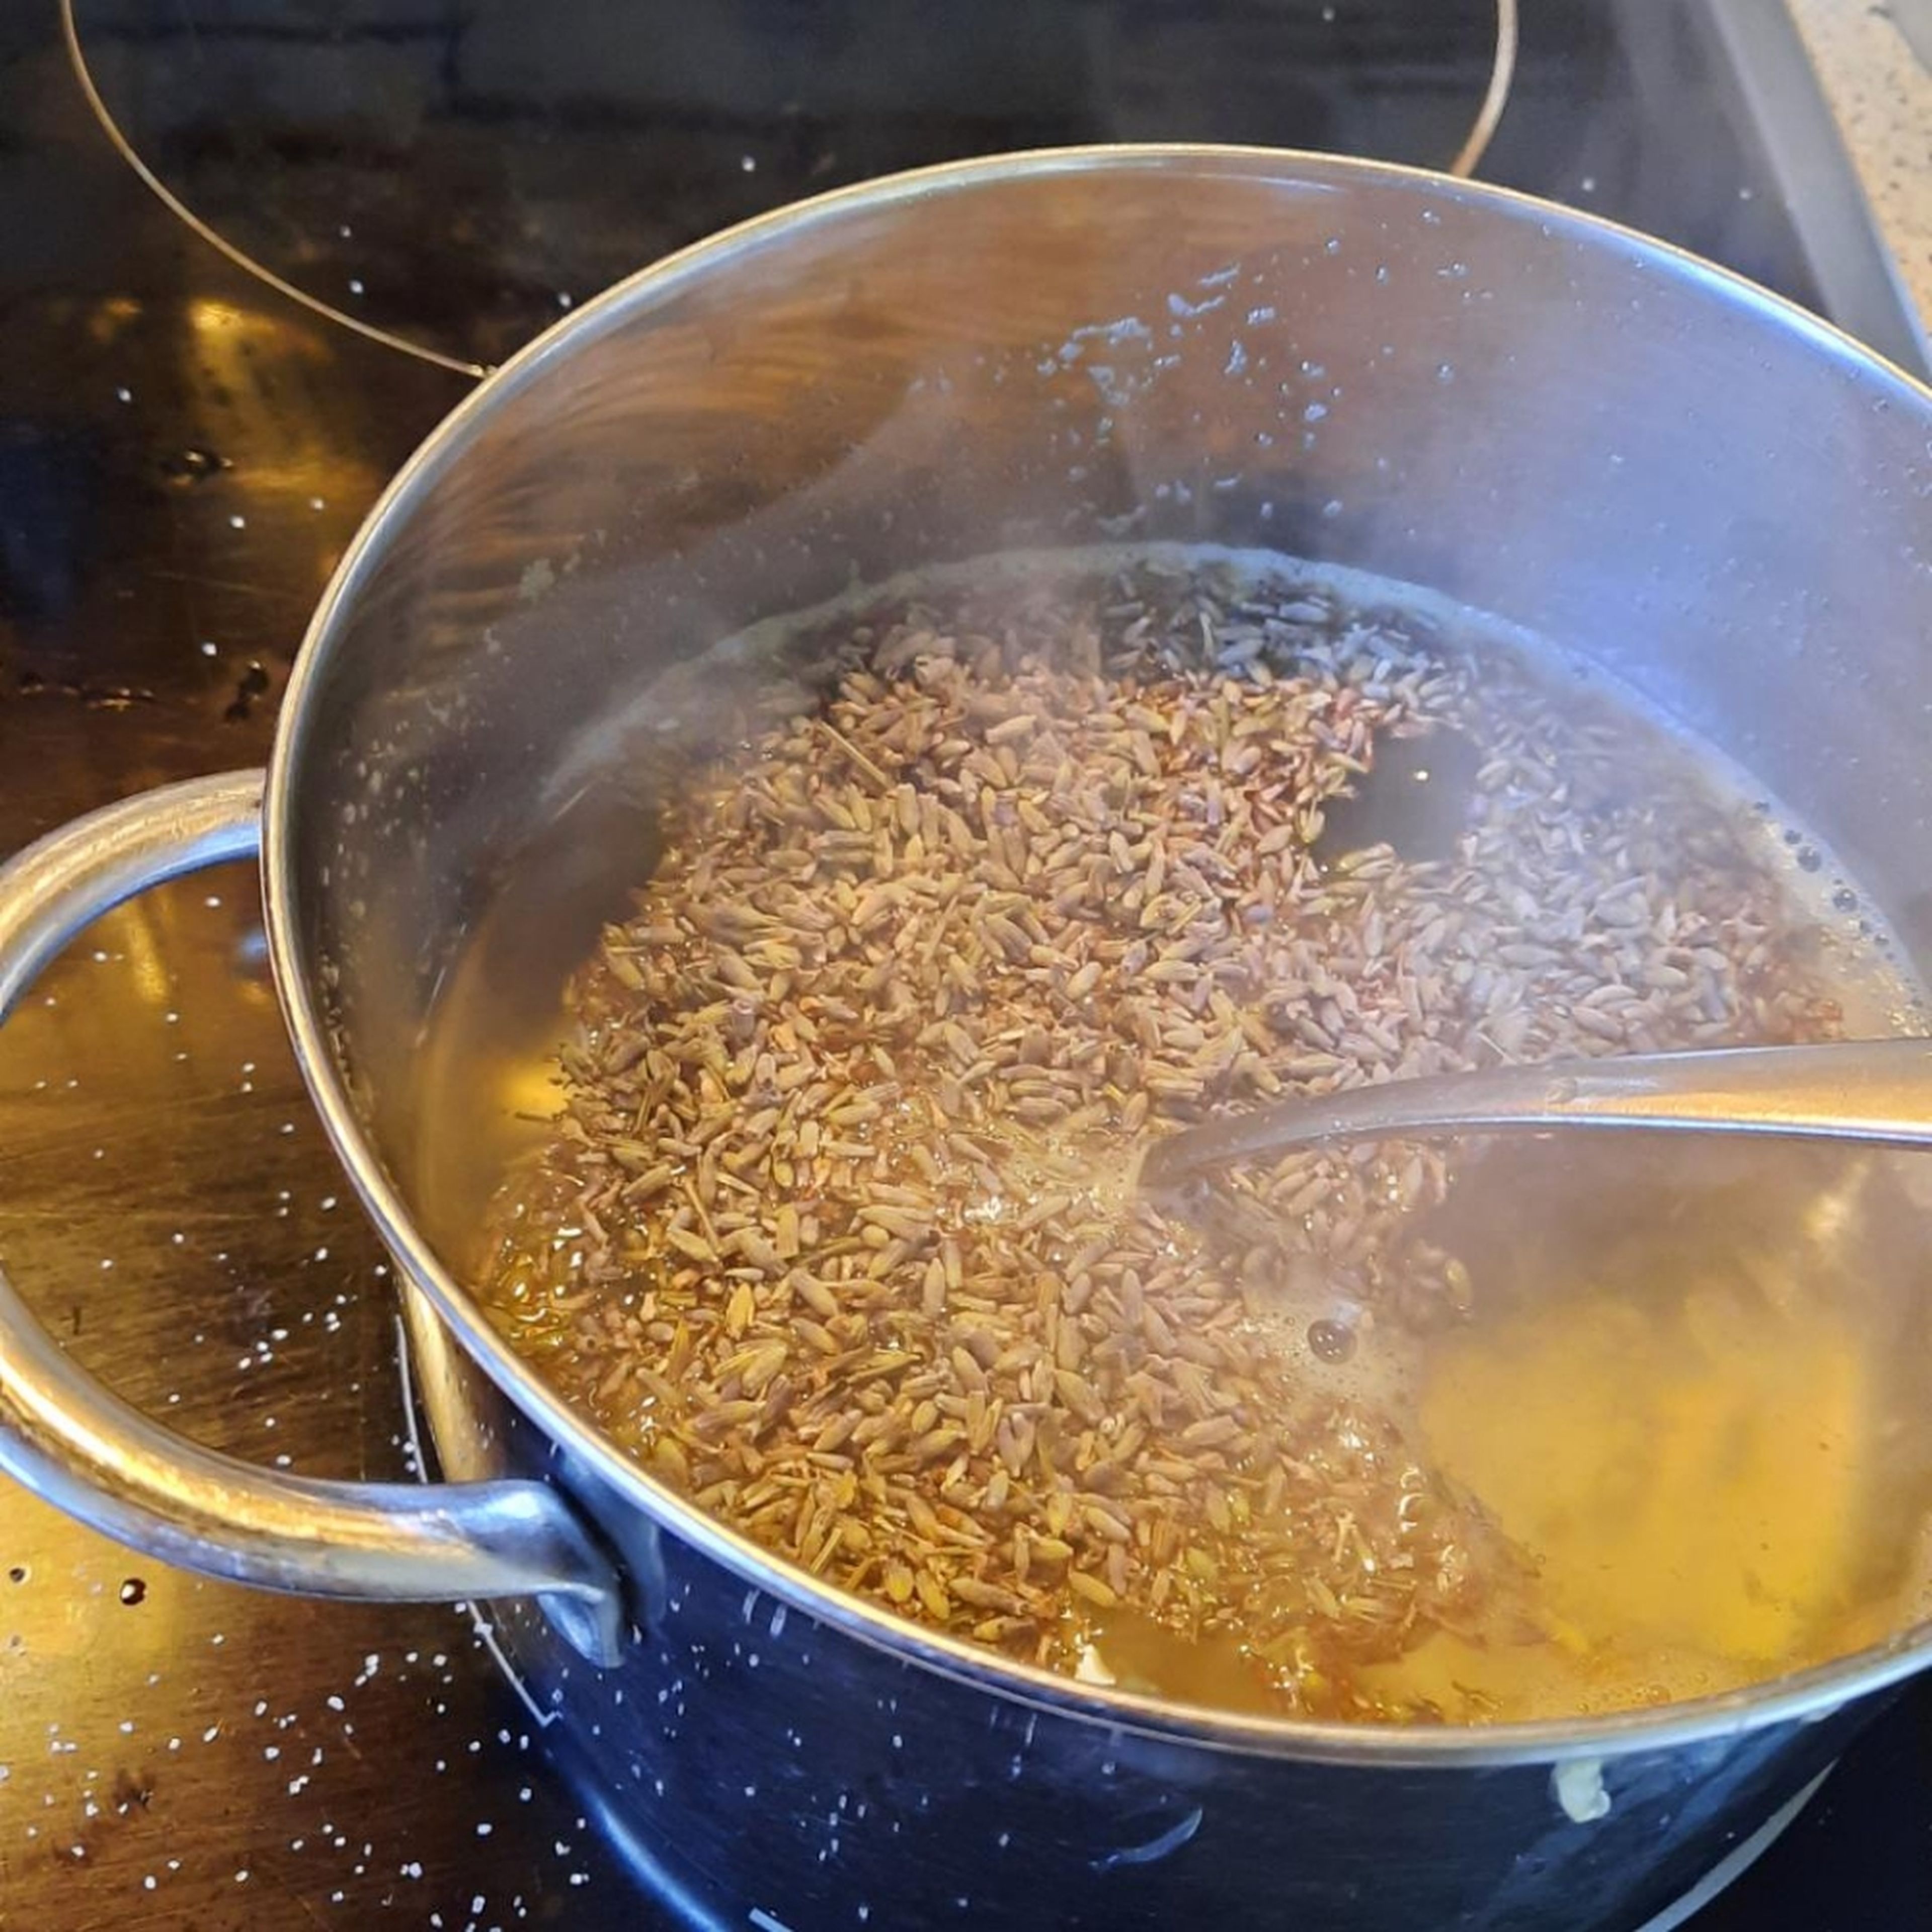 Add lavender and remove pot from heat. Let the lavender syrup steep for 10-15 min. Pass the syrup through a sieve (leaving the lavender in will render it bitter) Let cool for at least 2 hrs.